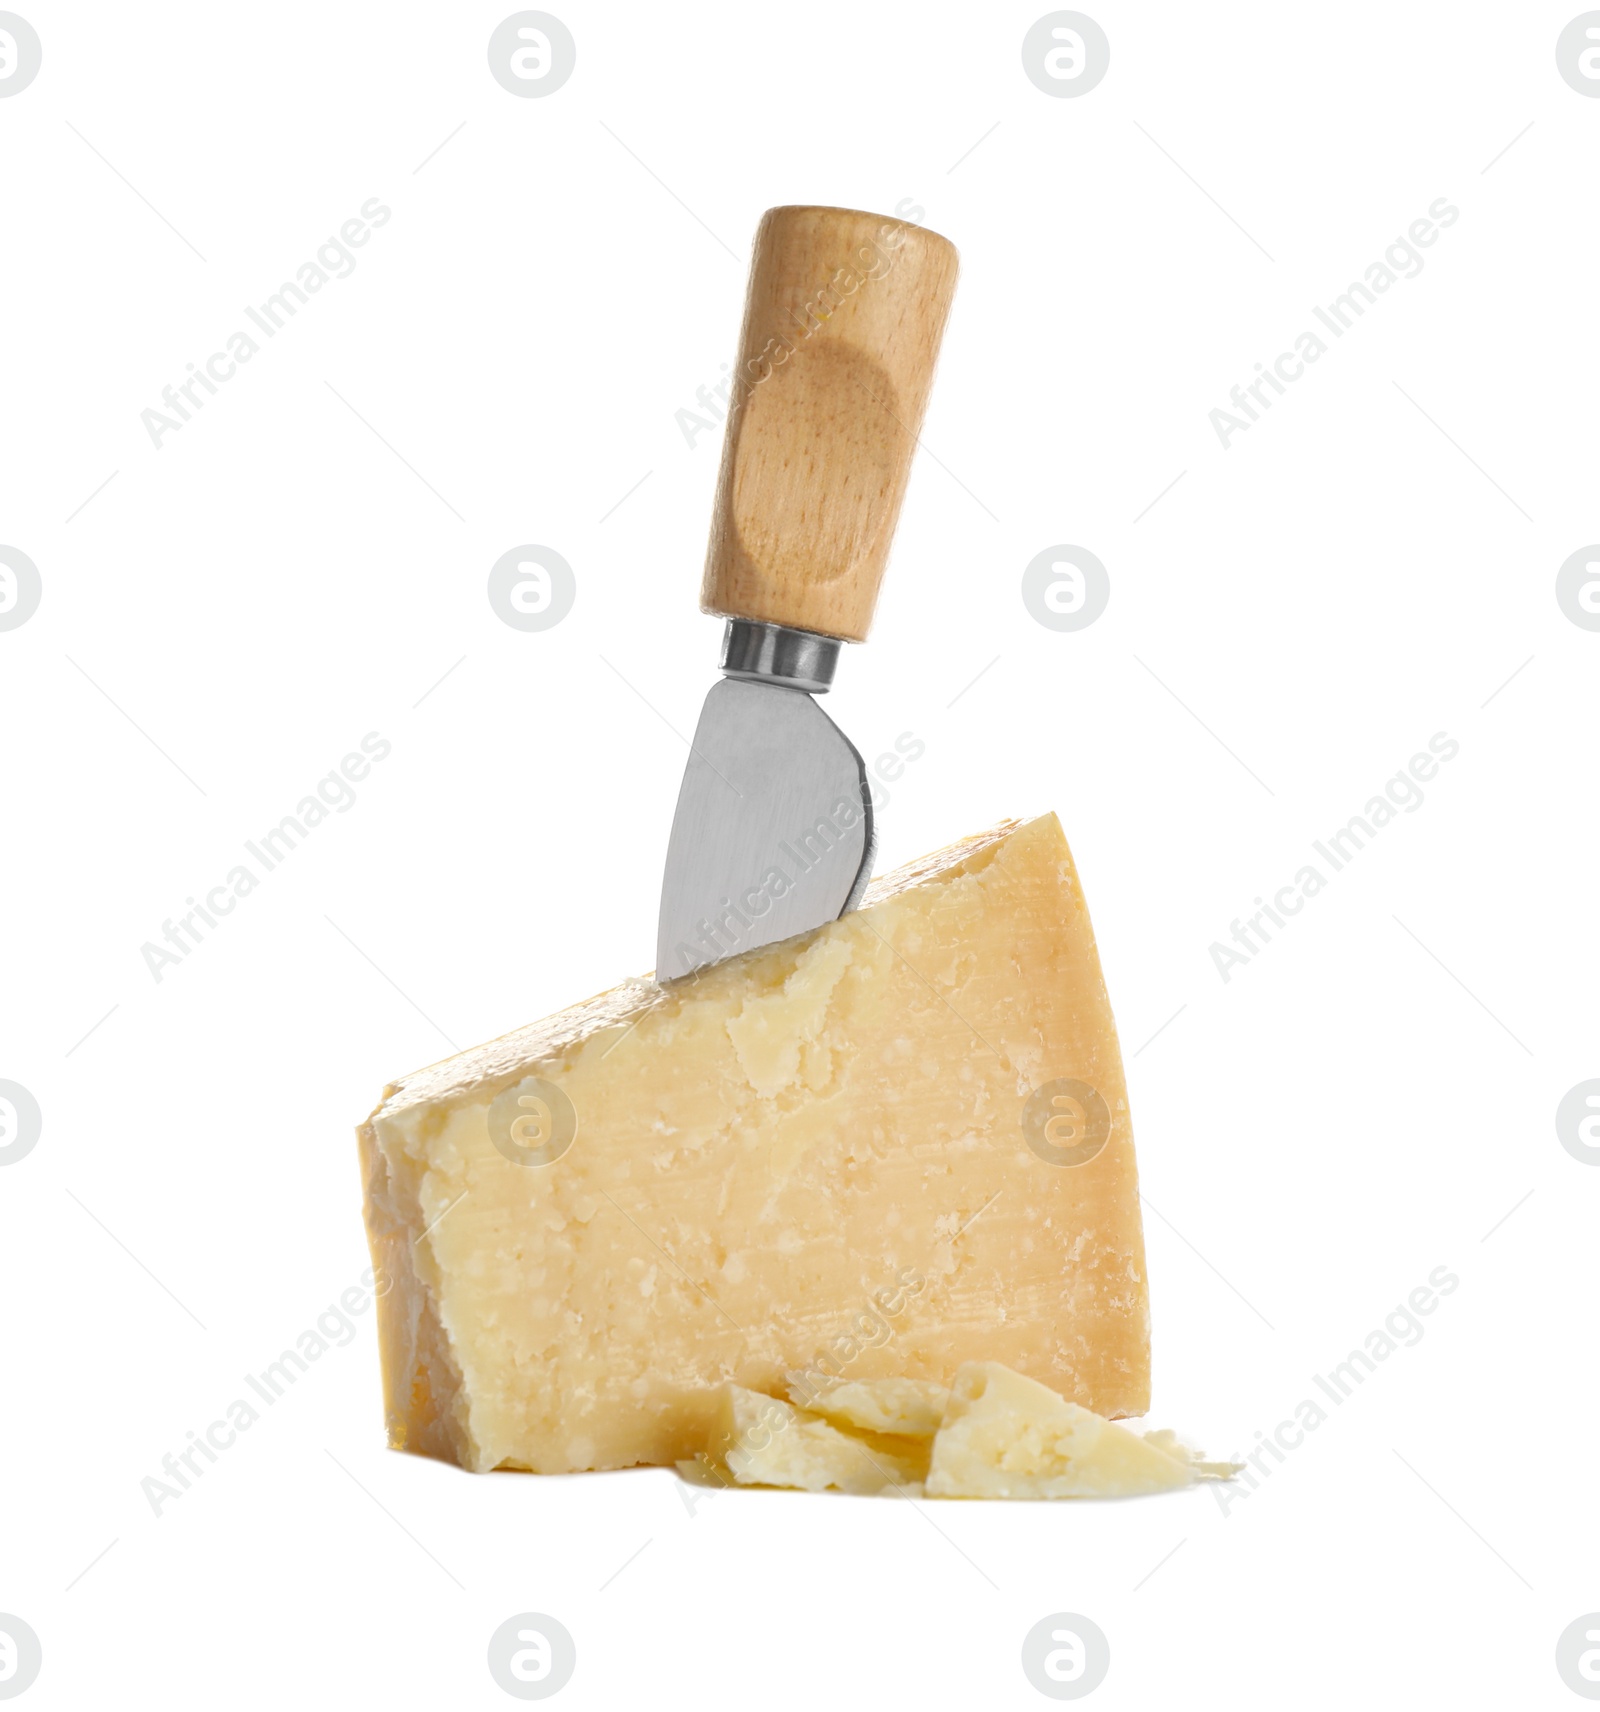 Photo of Piece of Parmesan cheese and knife on white background